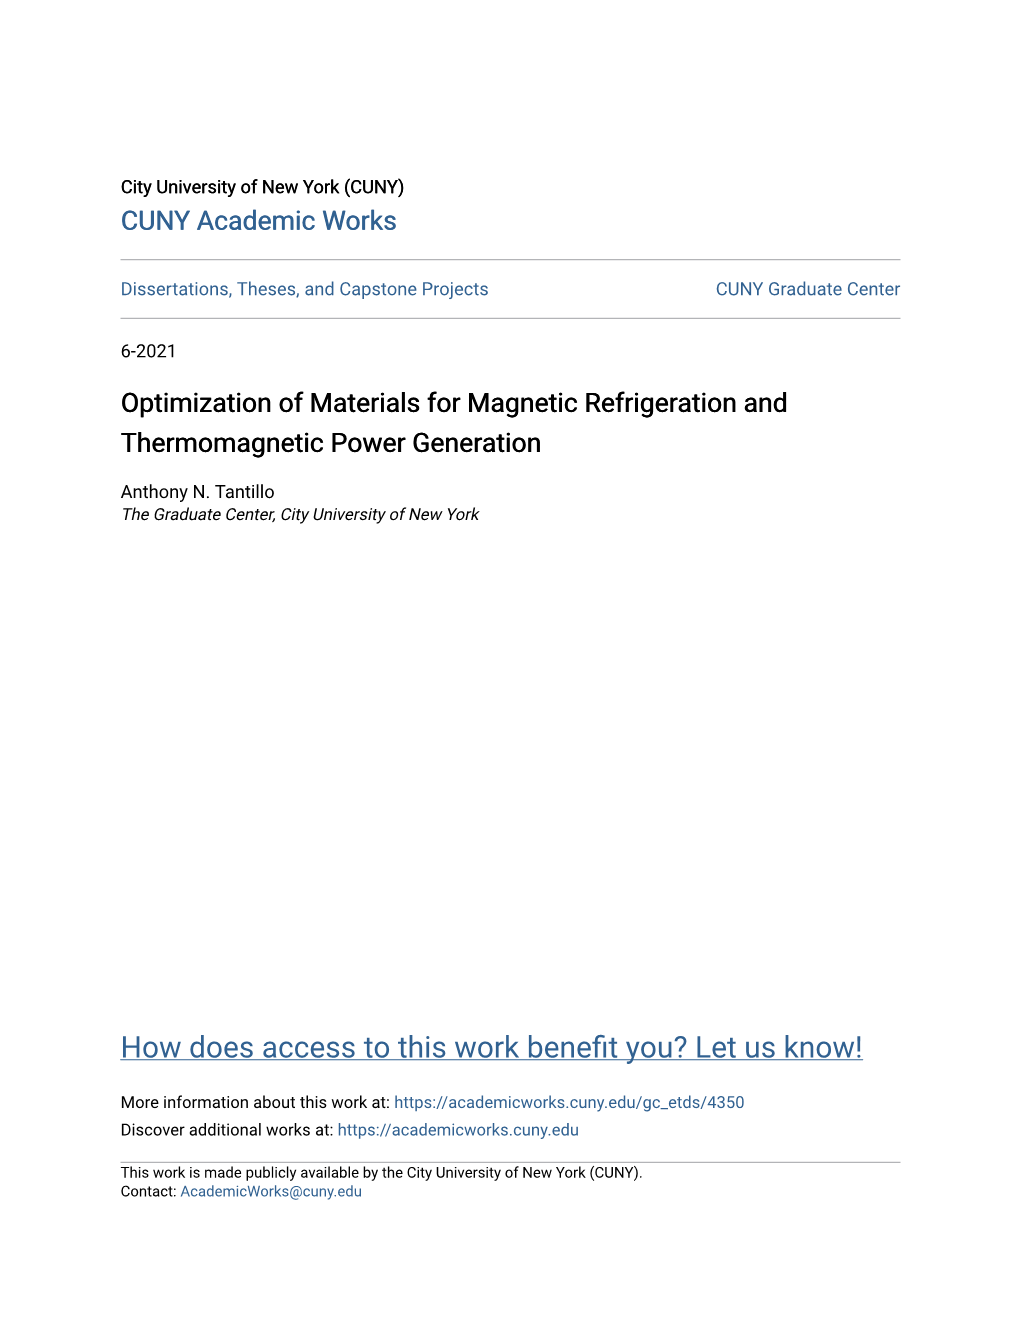 Optimization of Materials for Magnetic Refrigeration and Thermomagnetic Power Generation